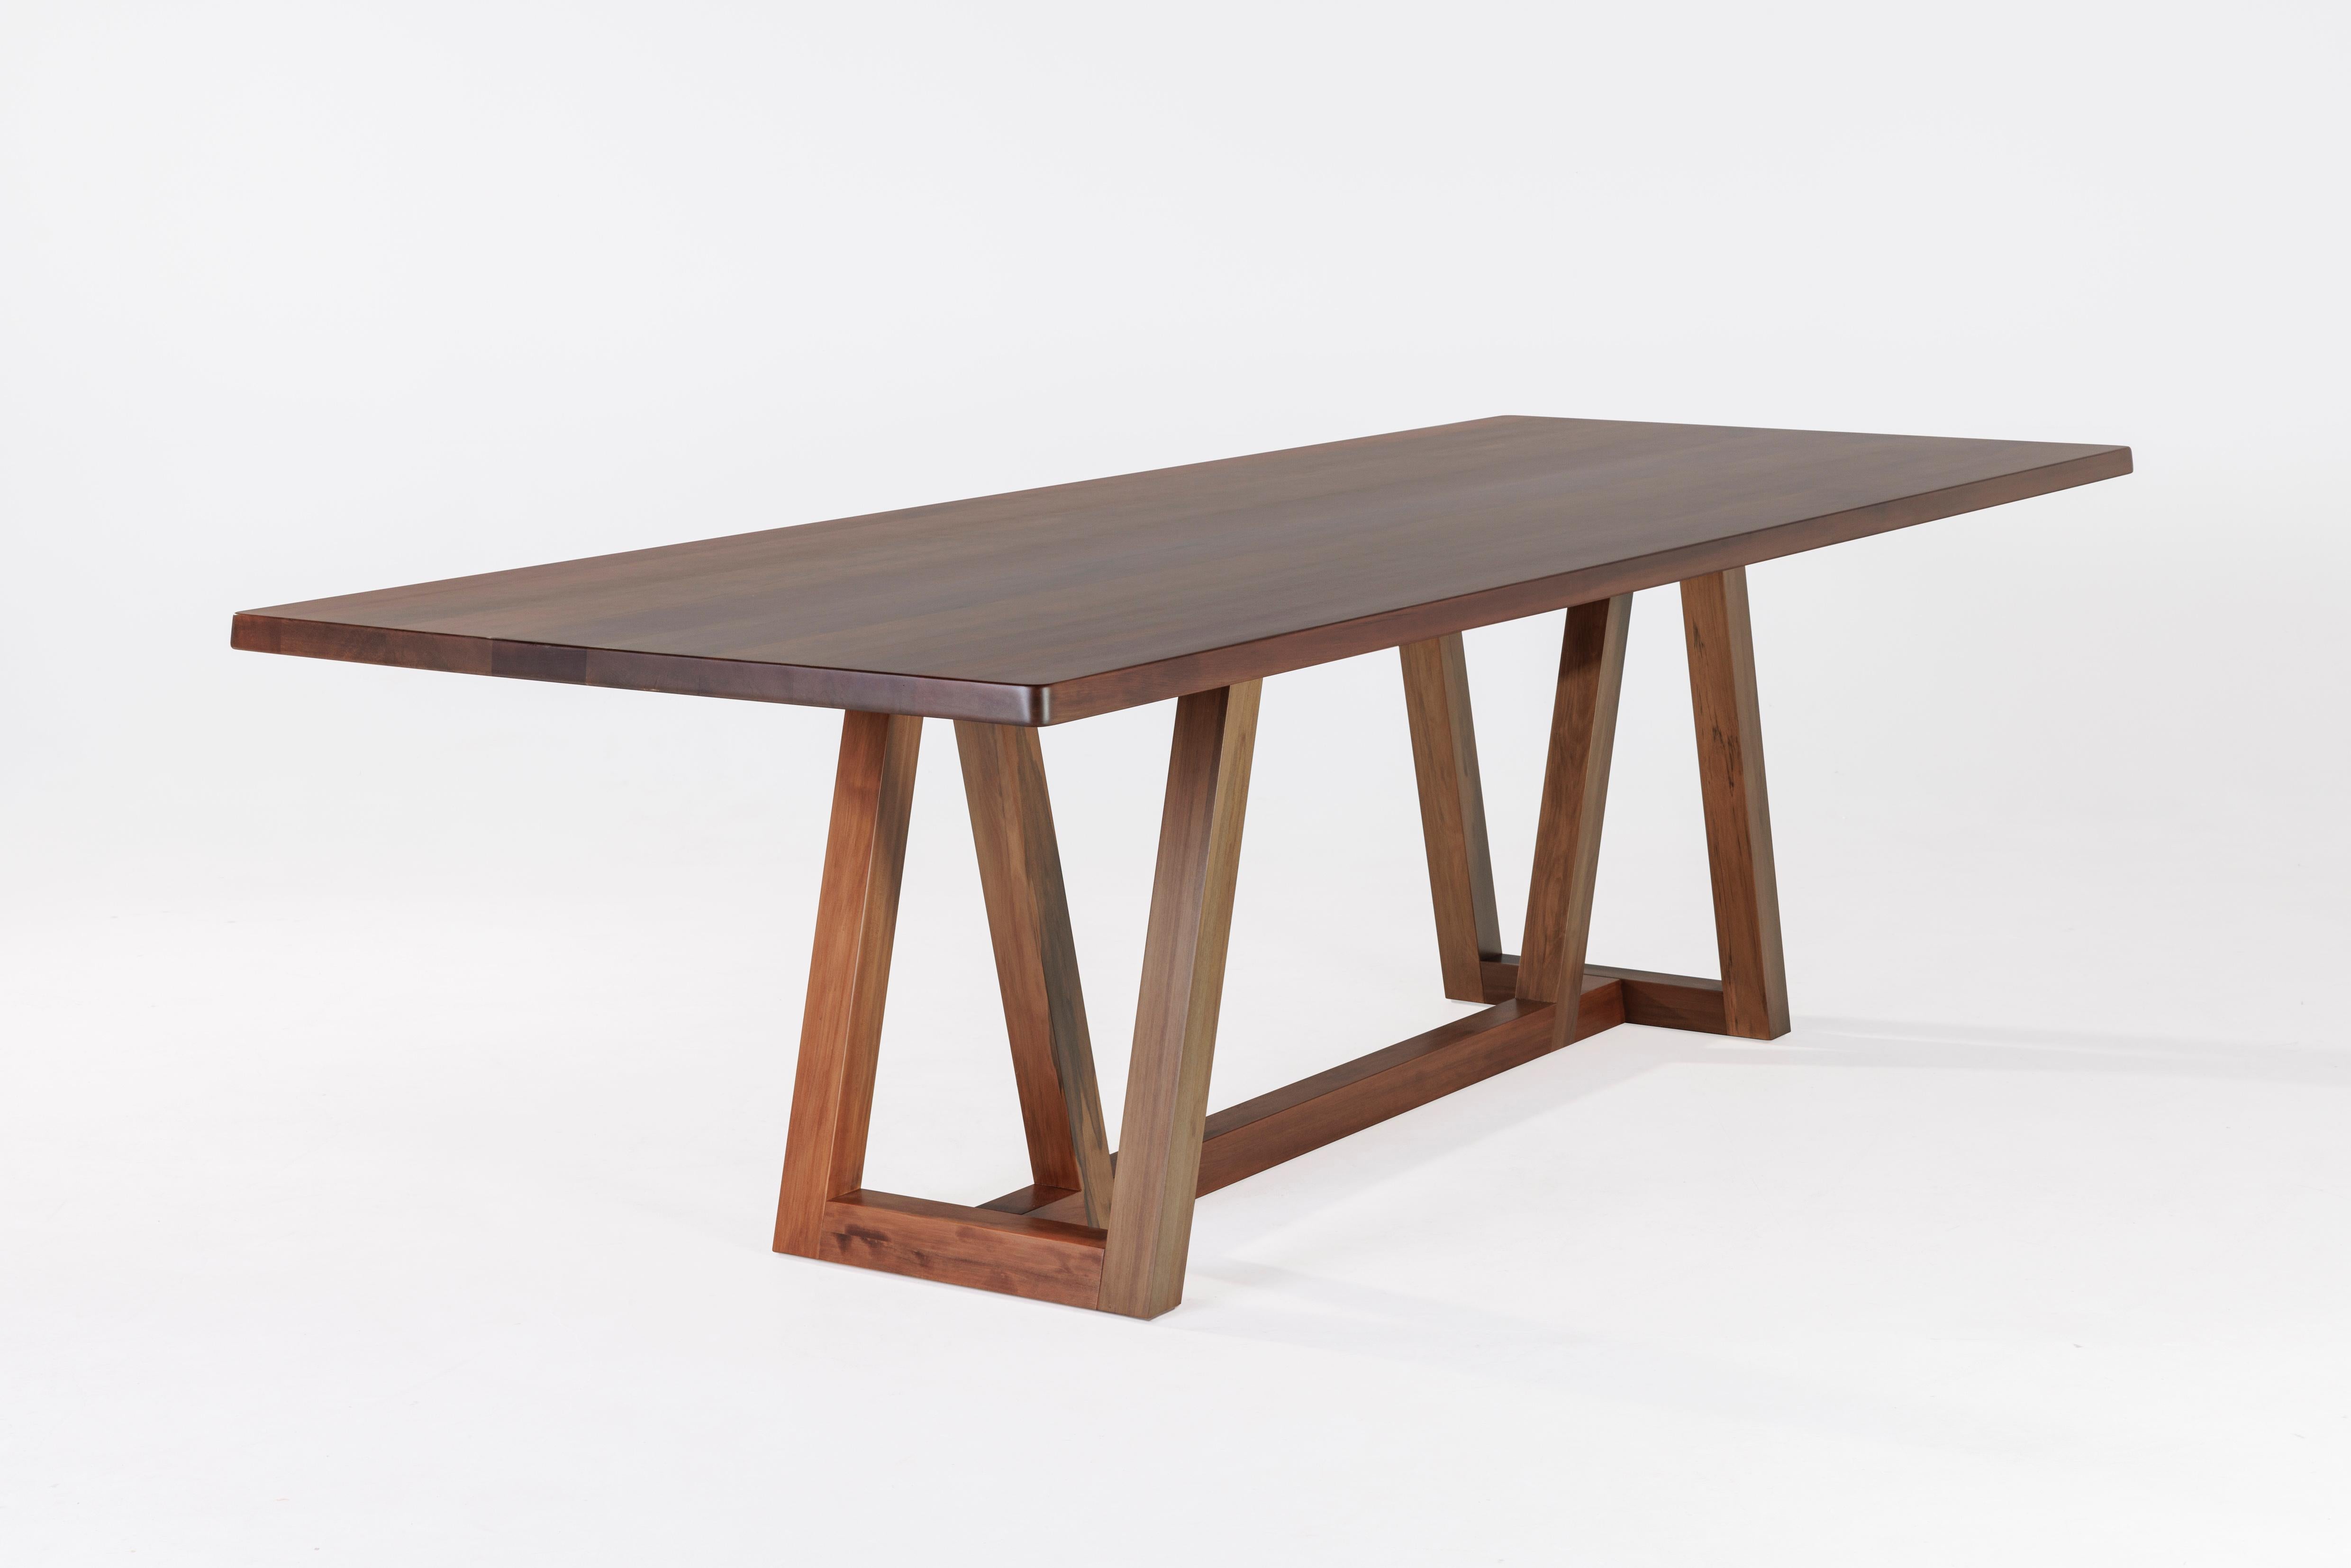 Hand-Crafted Luxury Modern Table Made from Sustainable Ancient River Rescued Wood For Sale